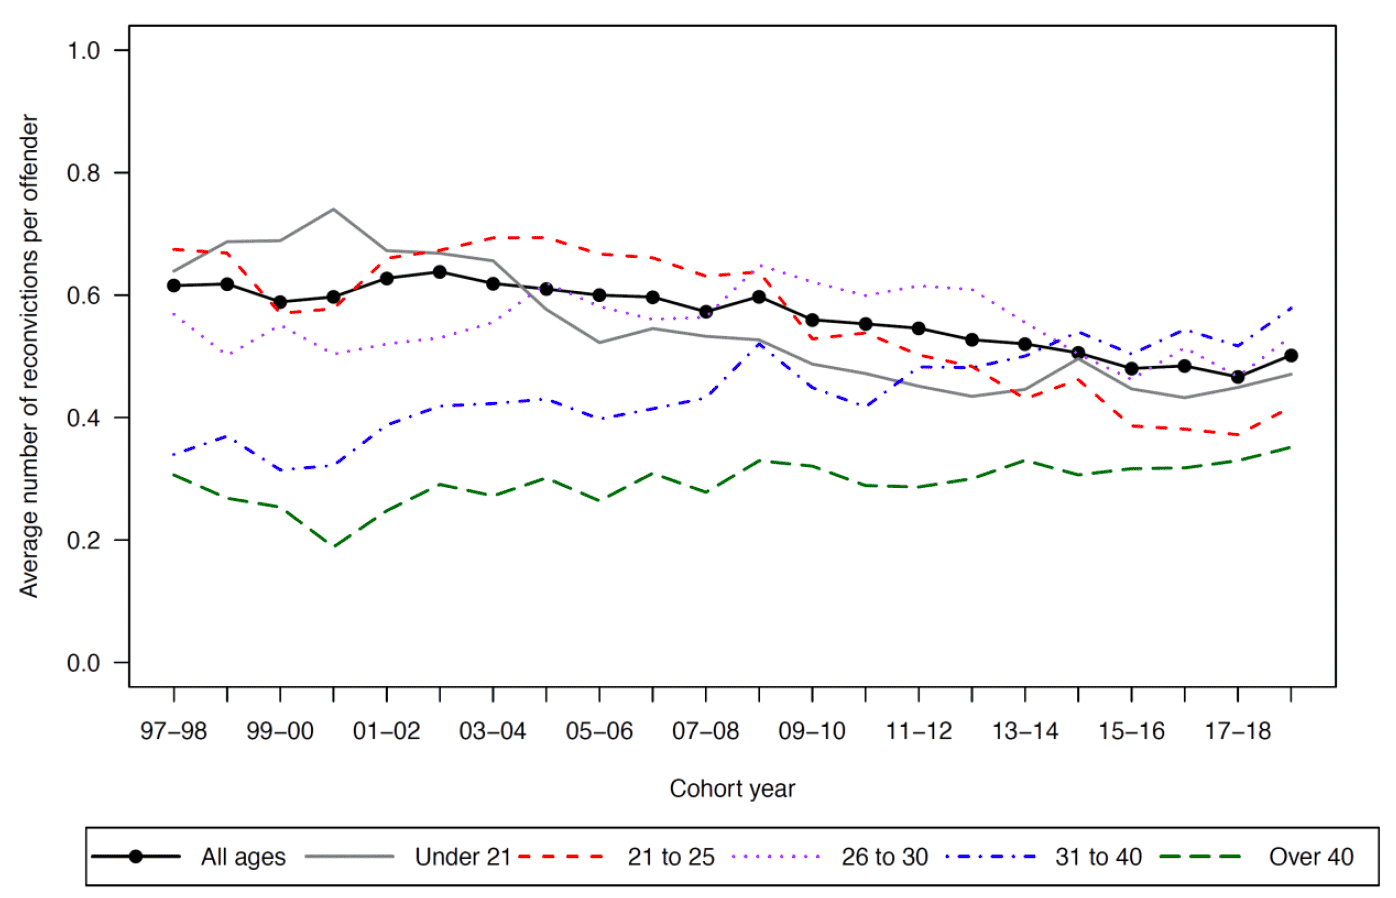 Chart showing the trend in the average number of reconvictions for each female age group between 1997-98 to 2018-19 